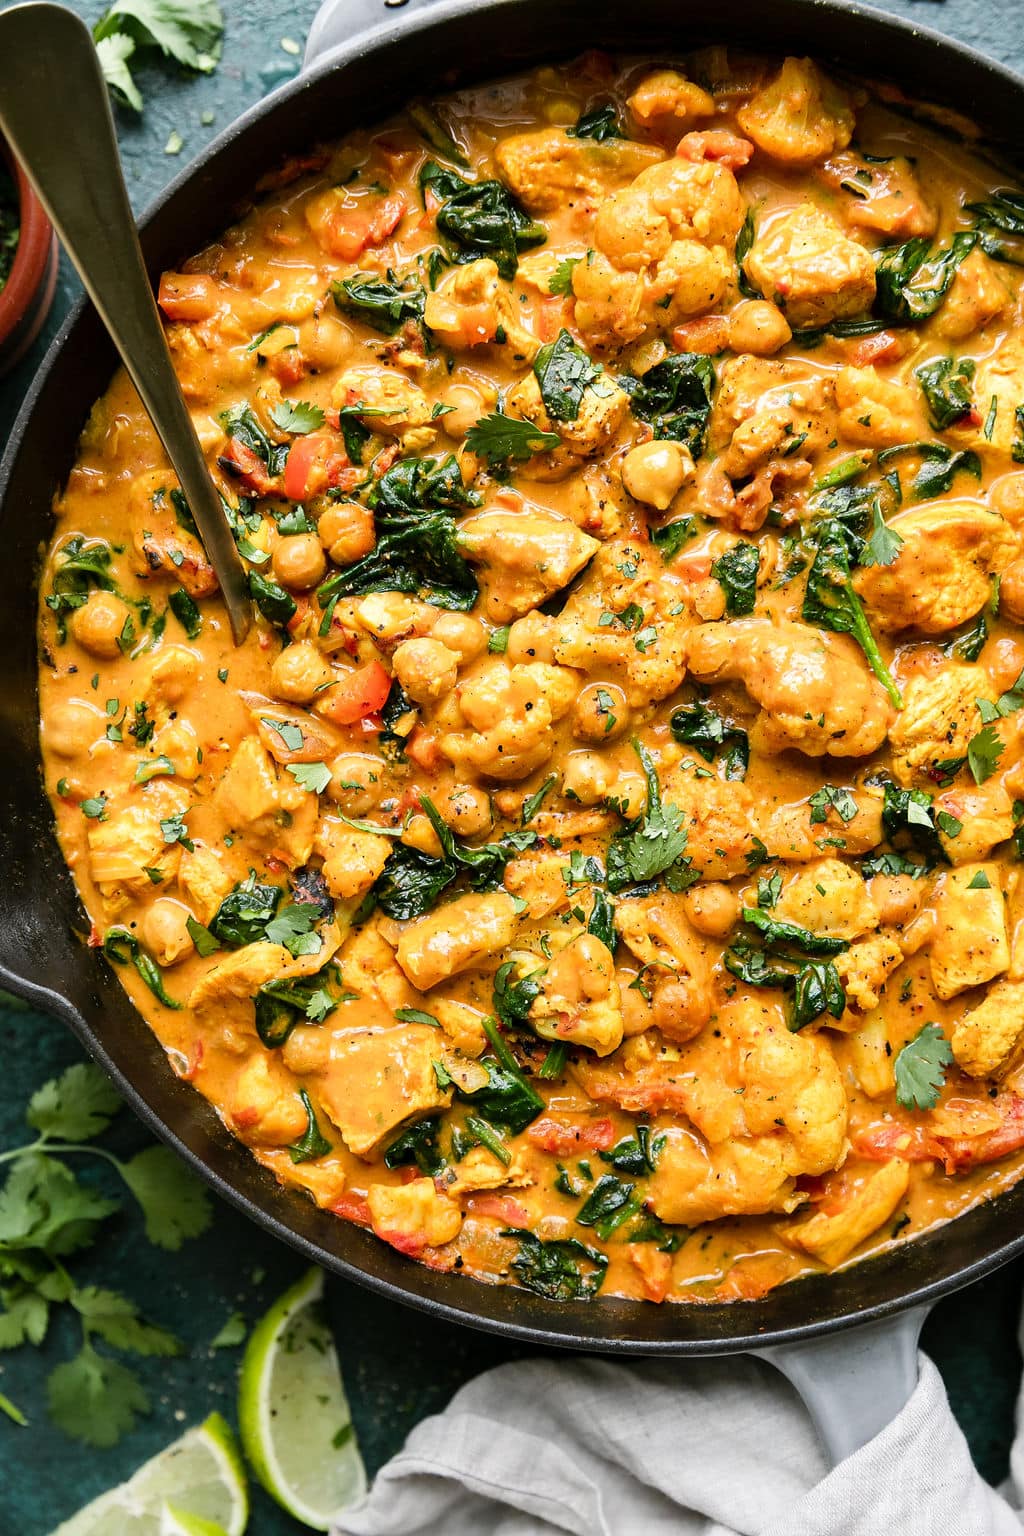 Overhead view cast iron skillet filled with chicken and chickpea curry in orange sauce.